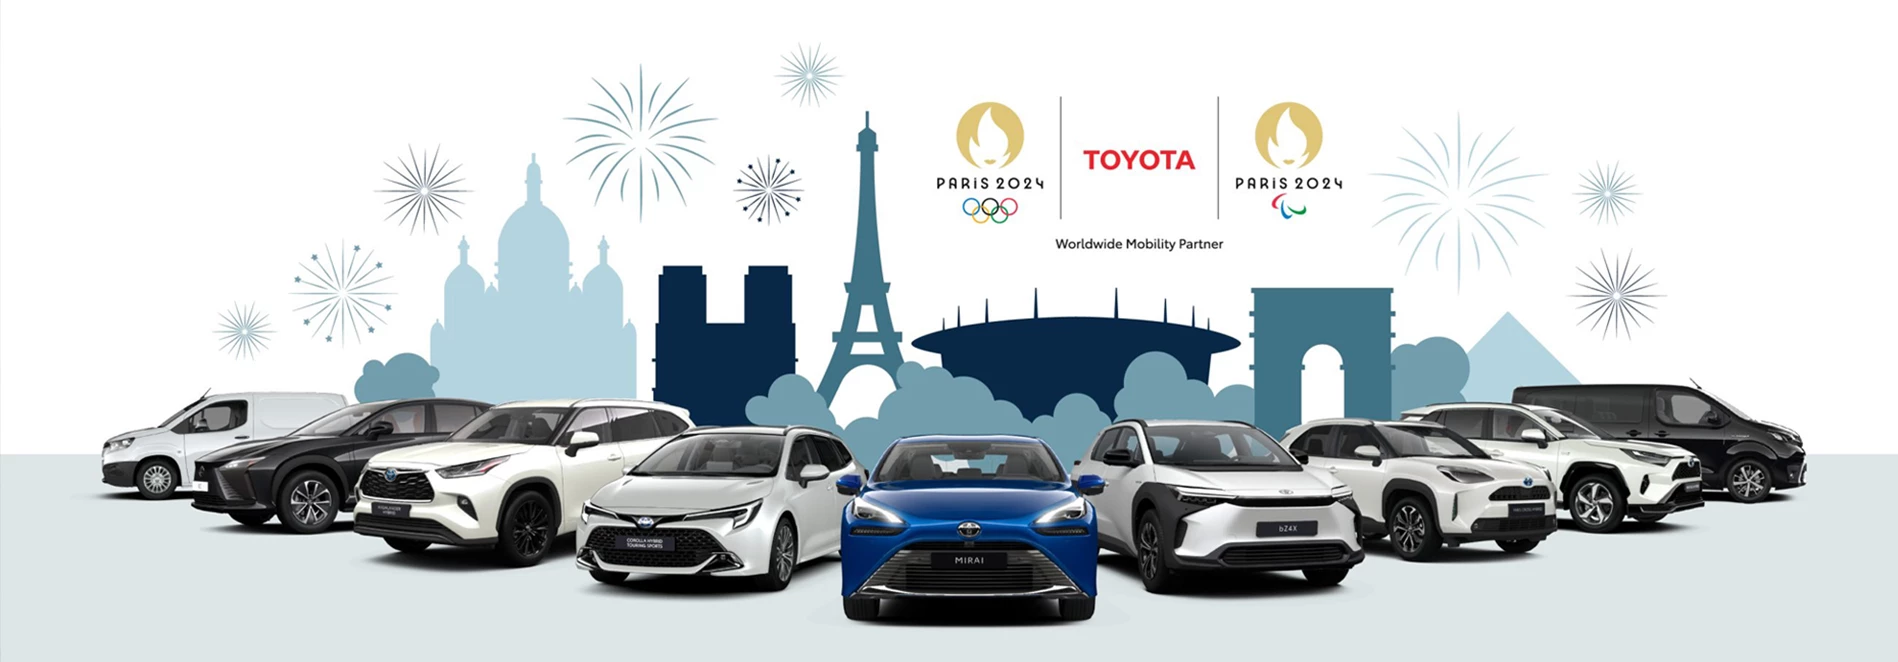 News Landing Image Toyota is an official partner of the Paris 2024 Olympic and Paralympic Games.